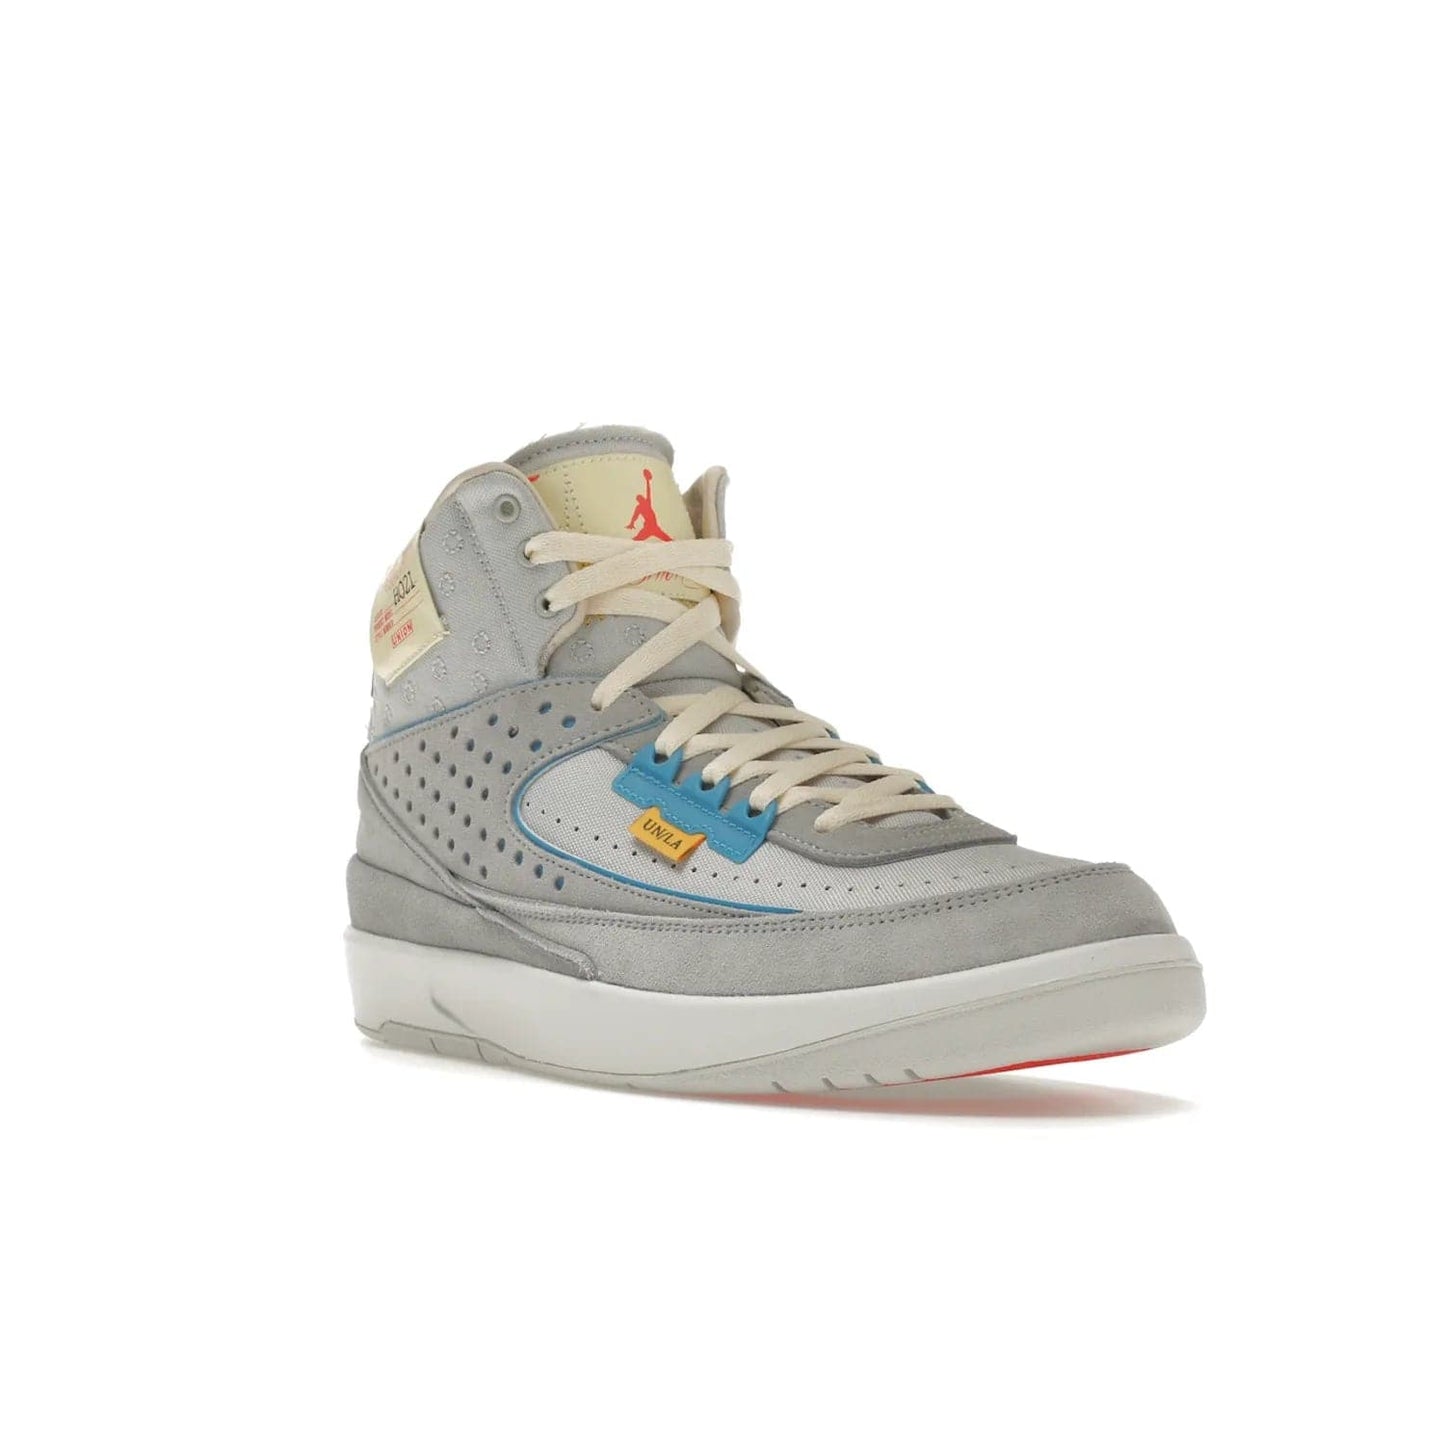 Jordan 2 Retro SP Union Grey Fog - Image 6 - Only at www.BallersClubKickz.com - Introducing the Air Jordan 2 Retro SP Union Grey Fog. This intricate sneaker design features a grey canvas upper with light blue eyelets, eyestay patches, and piping, plus custom external tags. Dropping in April 2022, this exclusive release offers a worn-in look and feel.